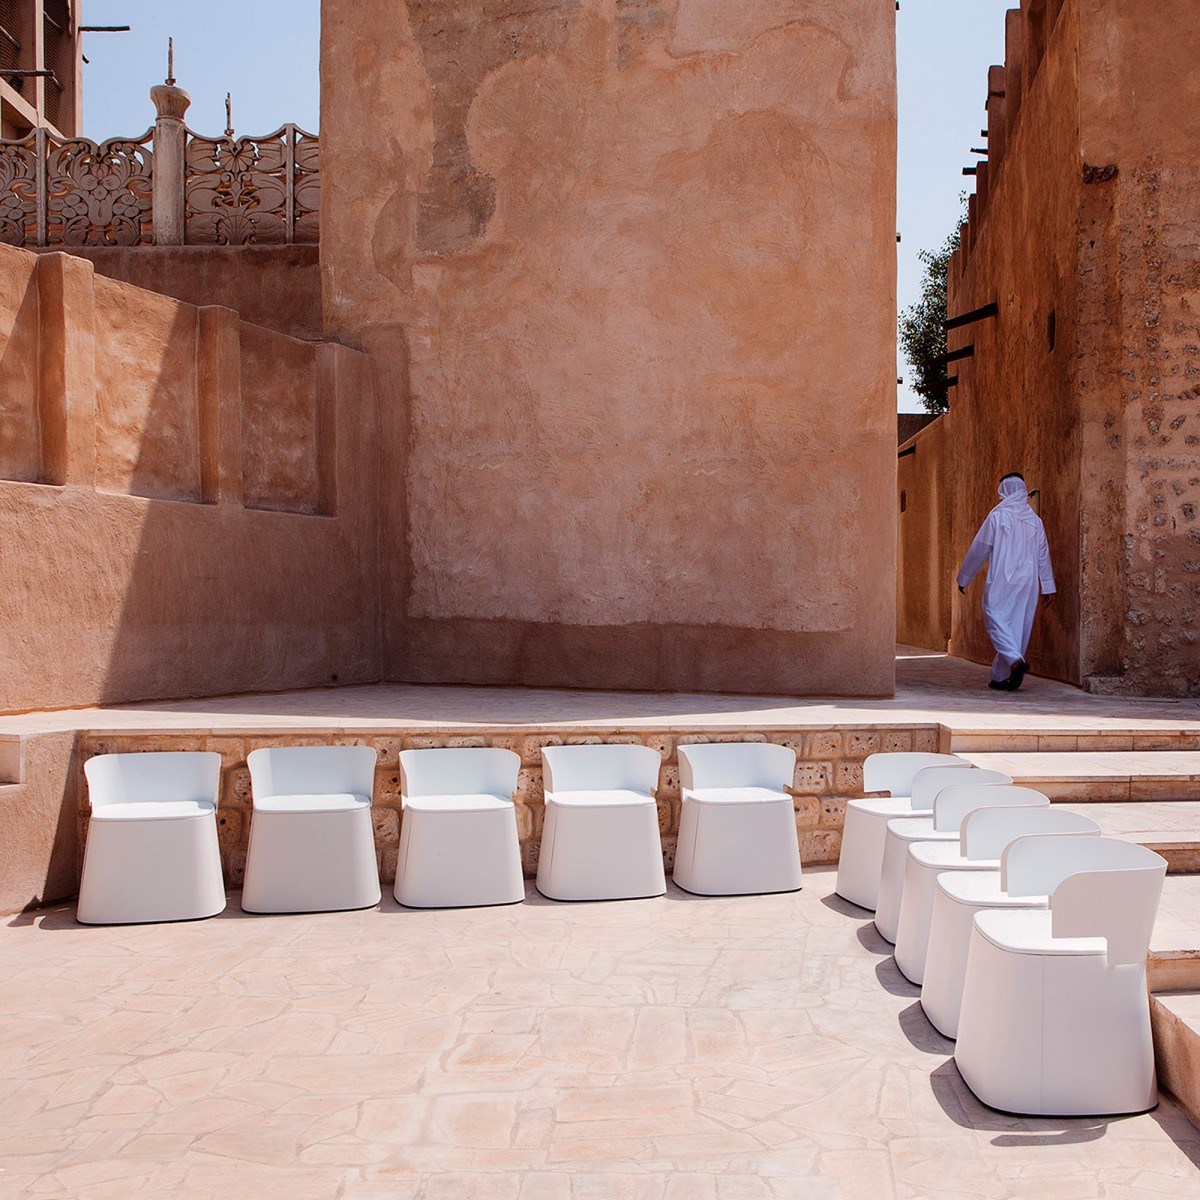 Set of white chairs, Dubaï Collection - Photograph by Jack Dabaghian